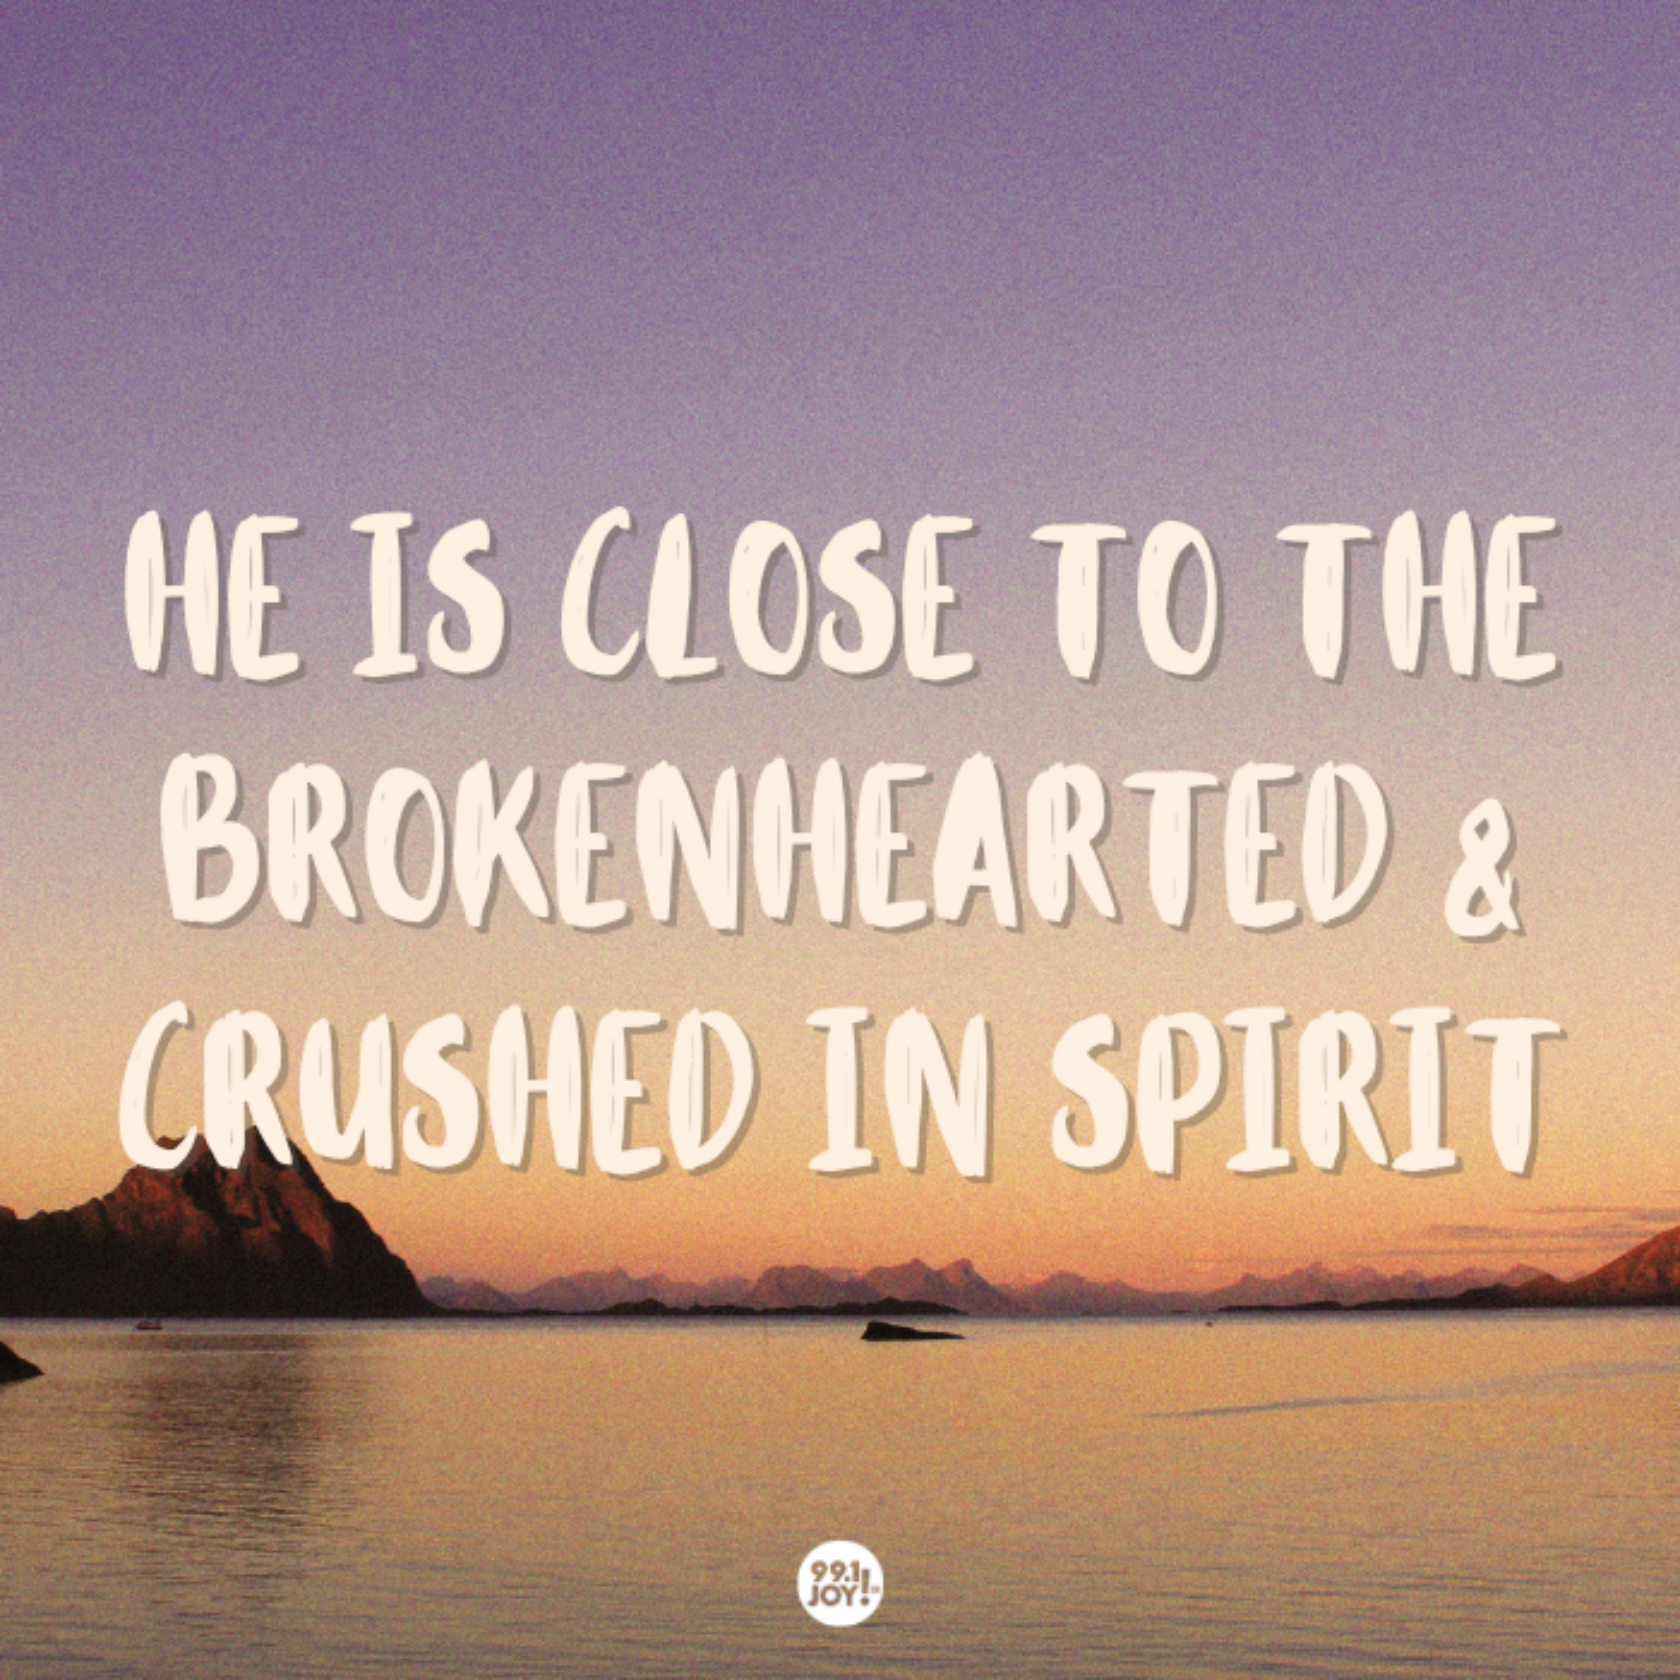 He Is Close To The Brokenhearted And Crushed In Spirit